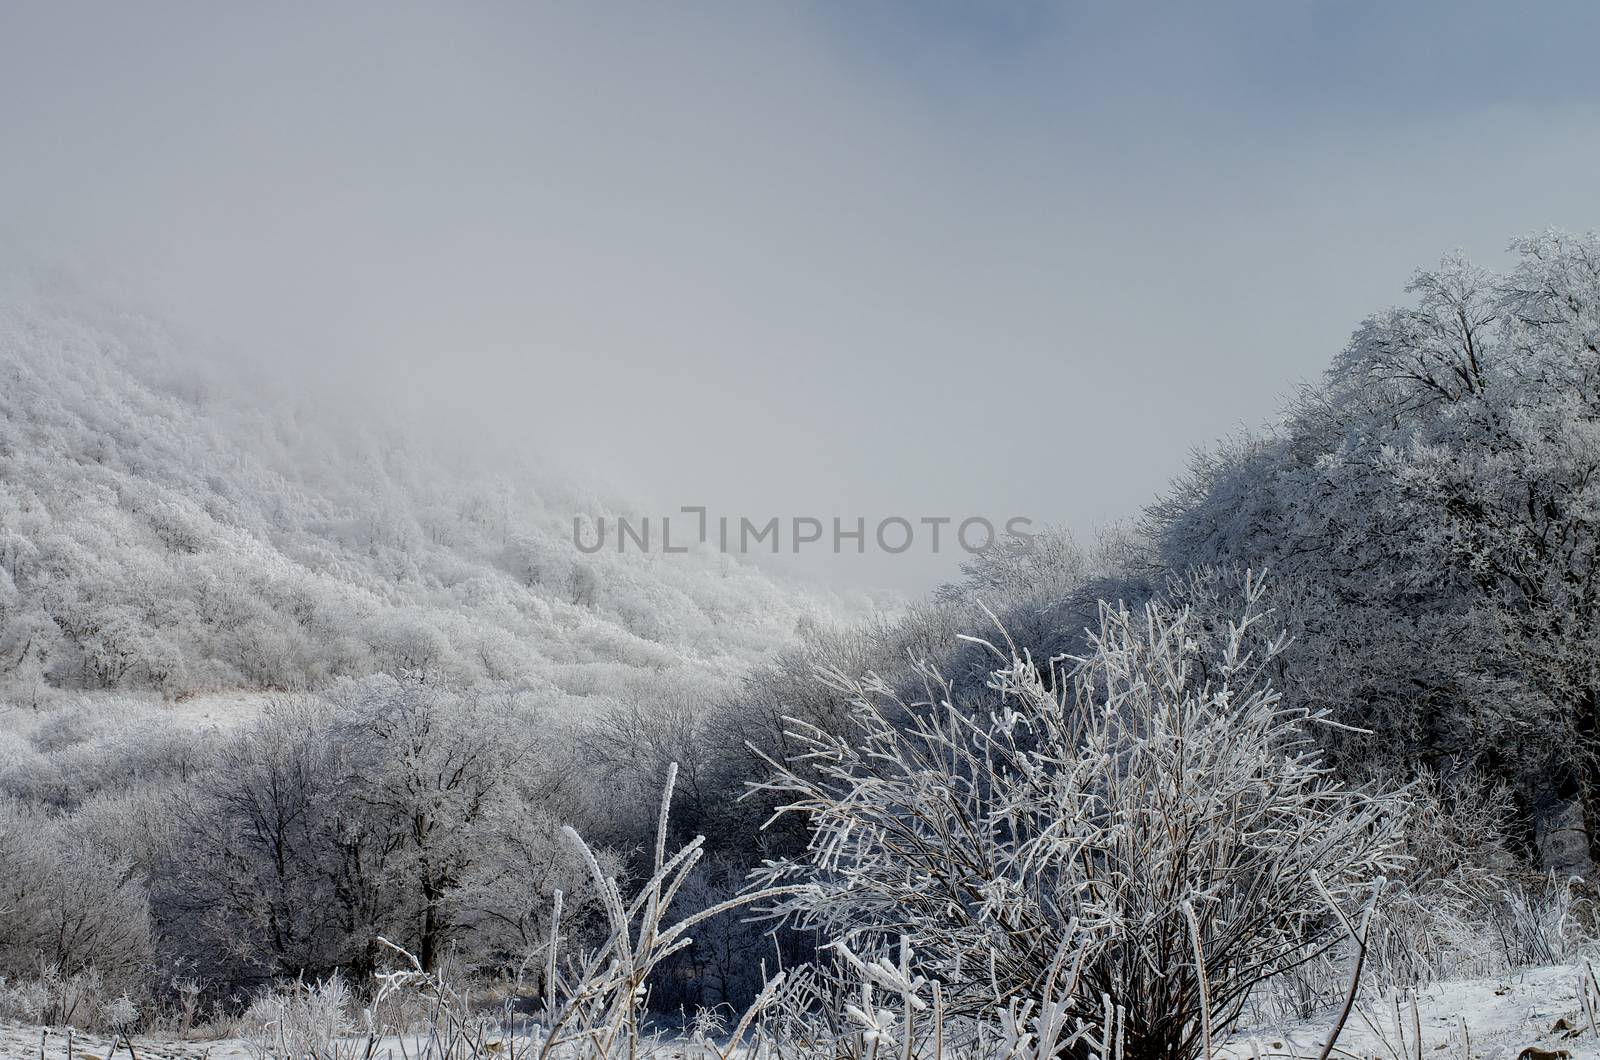 Beauty Landscape with Snowy Tree, Frozen Branches and Shadow Mount Hills on Dramatic Grey Cloudy Sky background Outdoors